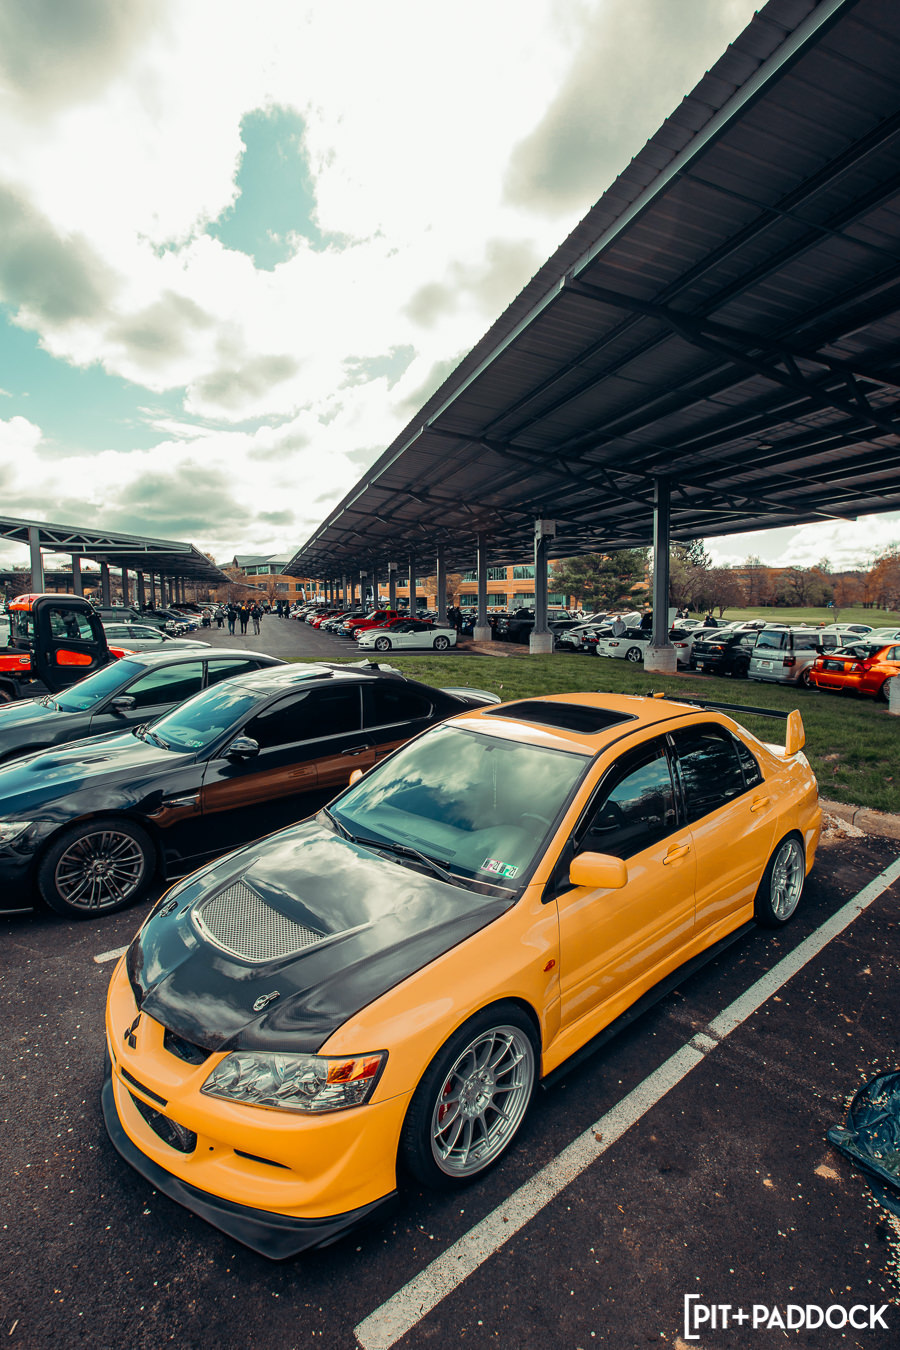 Our Inaugural Cars+Coffee Hosts More Than 400 Cars At T14